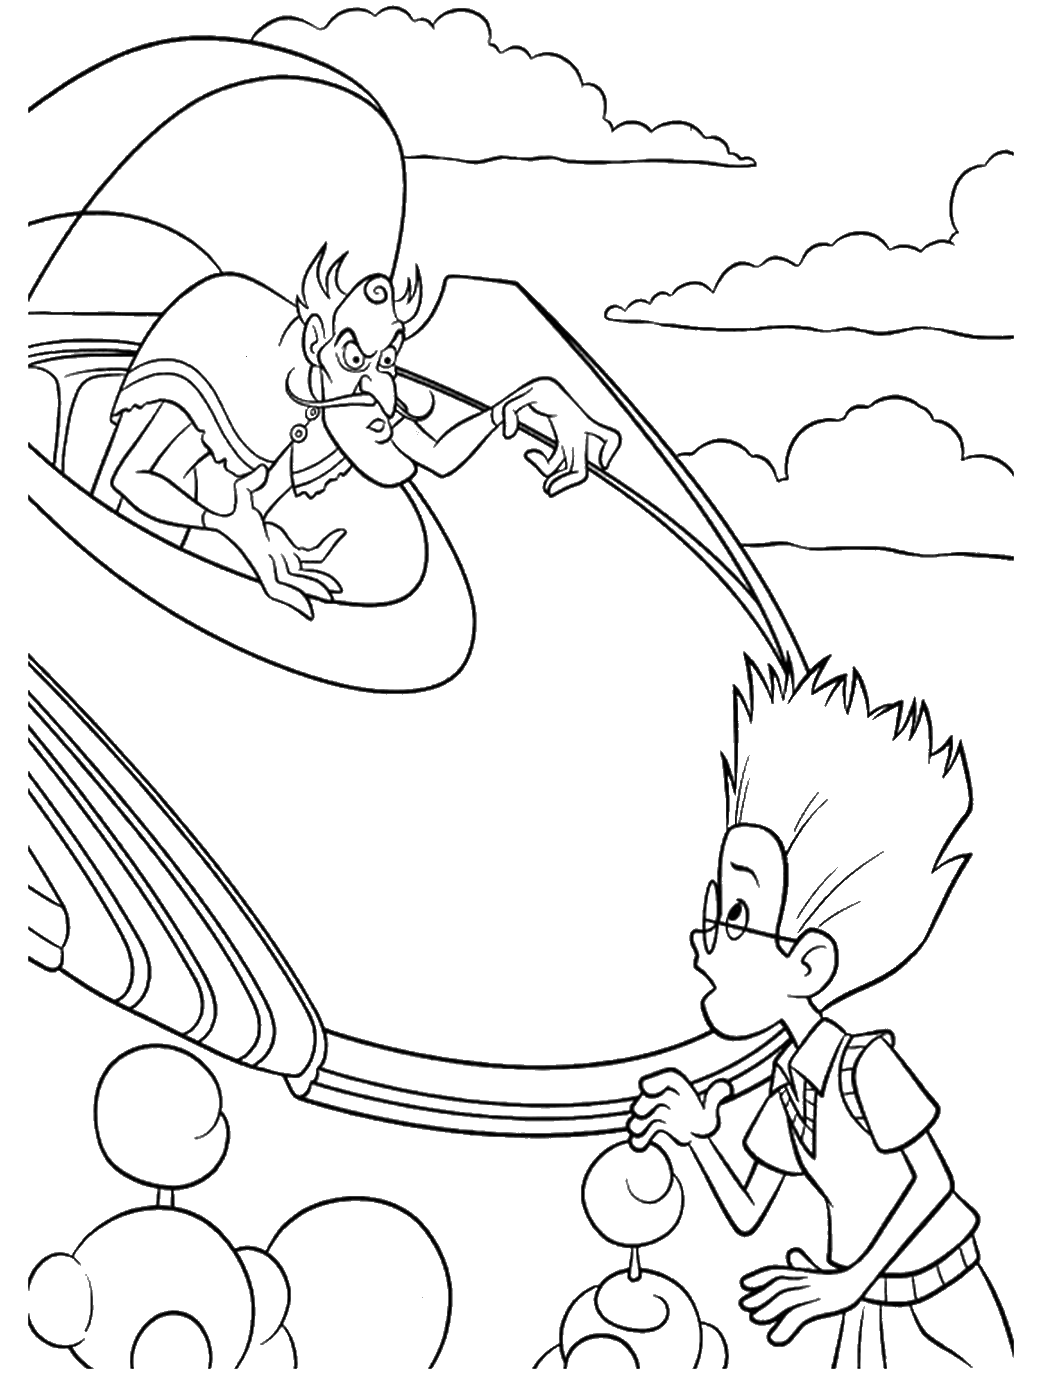 Meet the Robinsons Coloring Pages TV Film Printable 2020 04962 Coloring4free